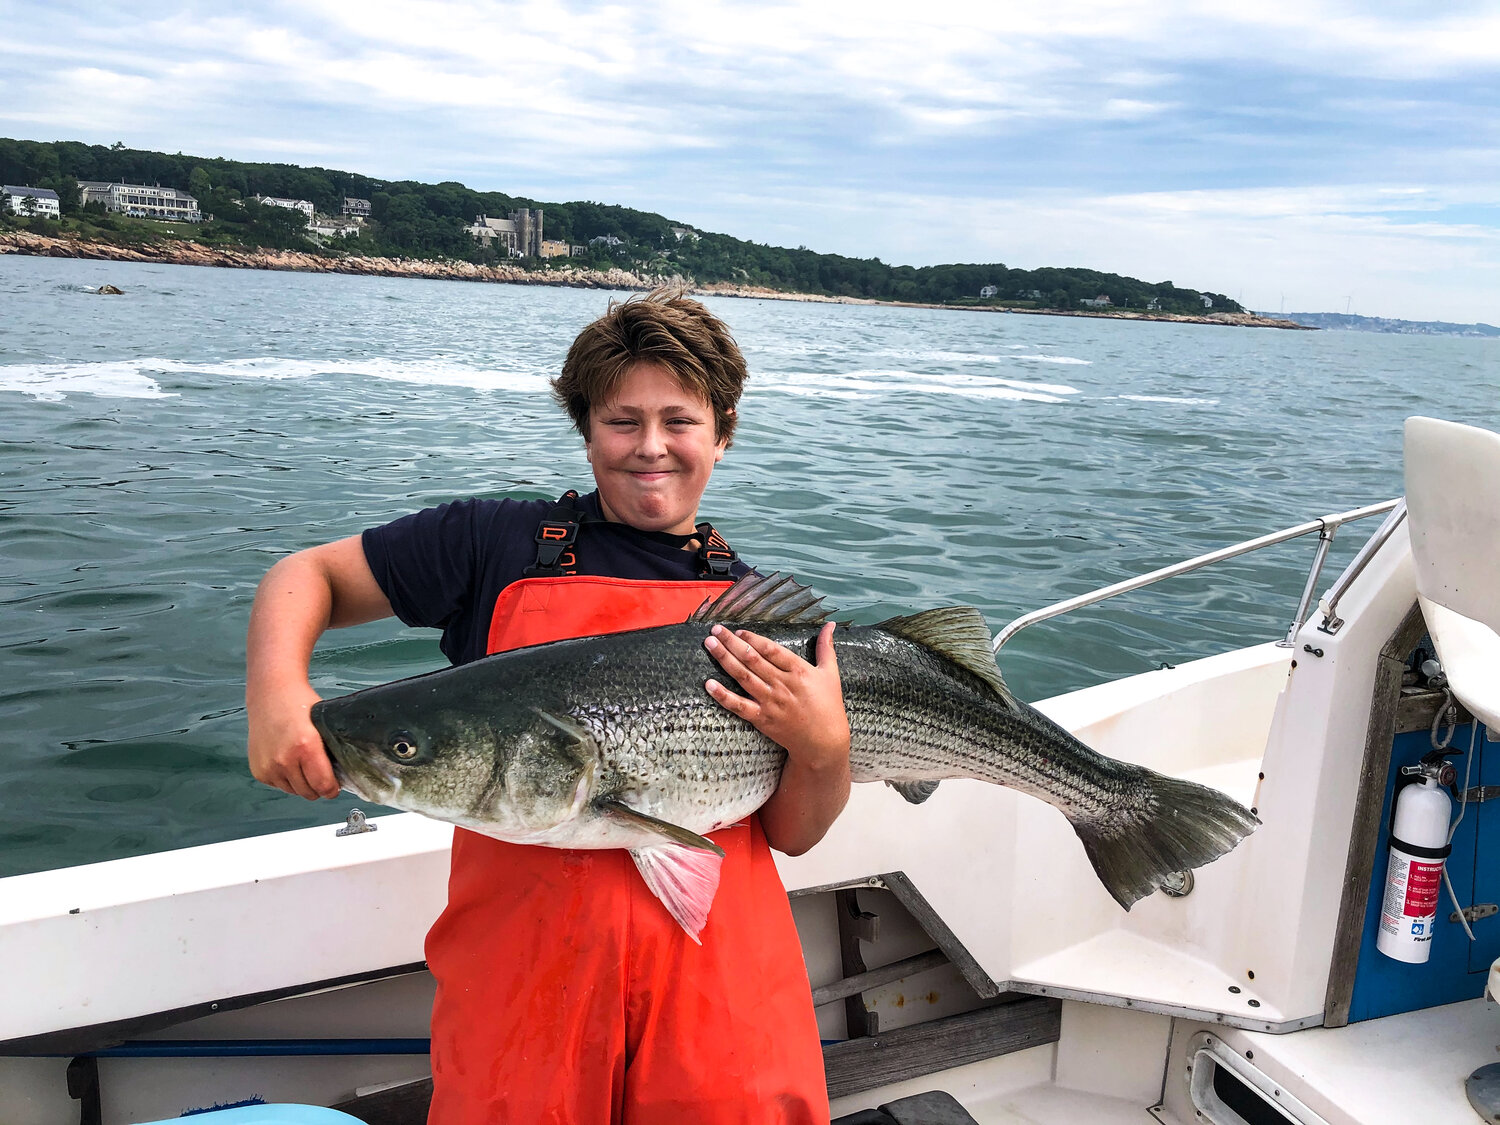 Anthony Brown, winner of the Biggest Striper – Boat (age 12 and under) category with a 43-inch long Striper! 